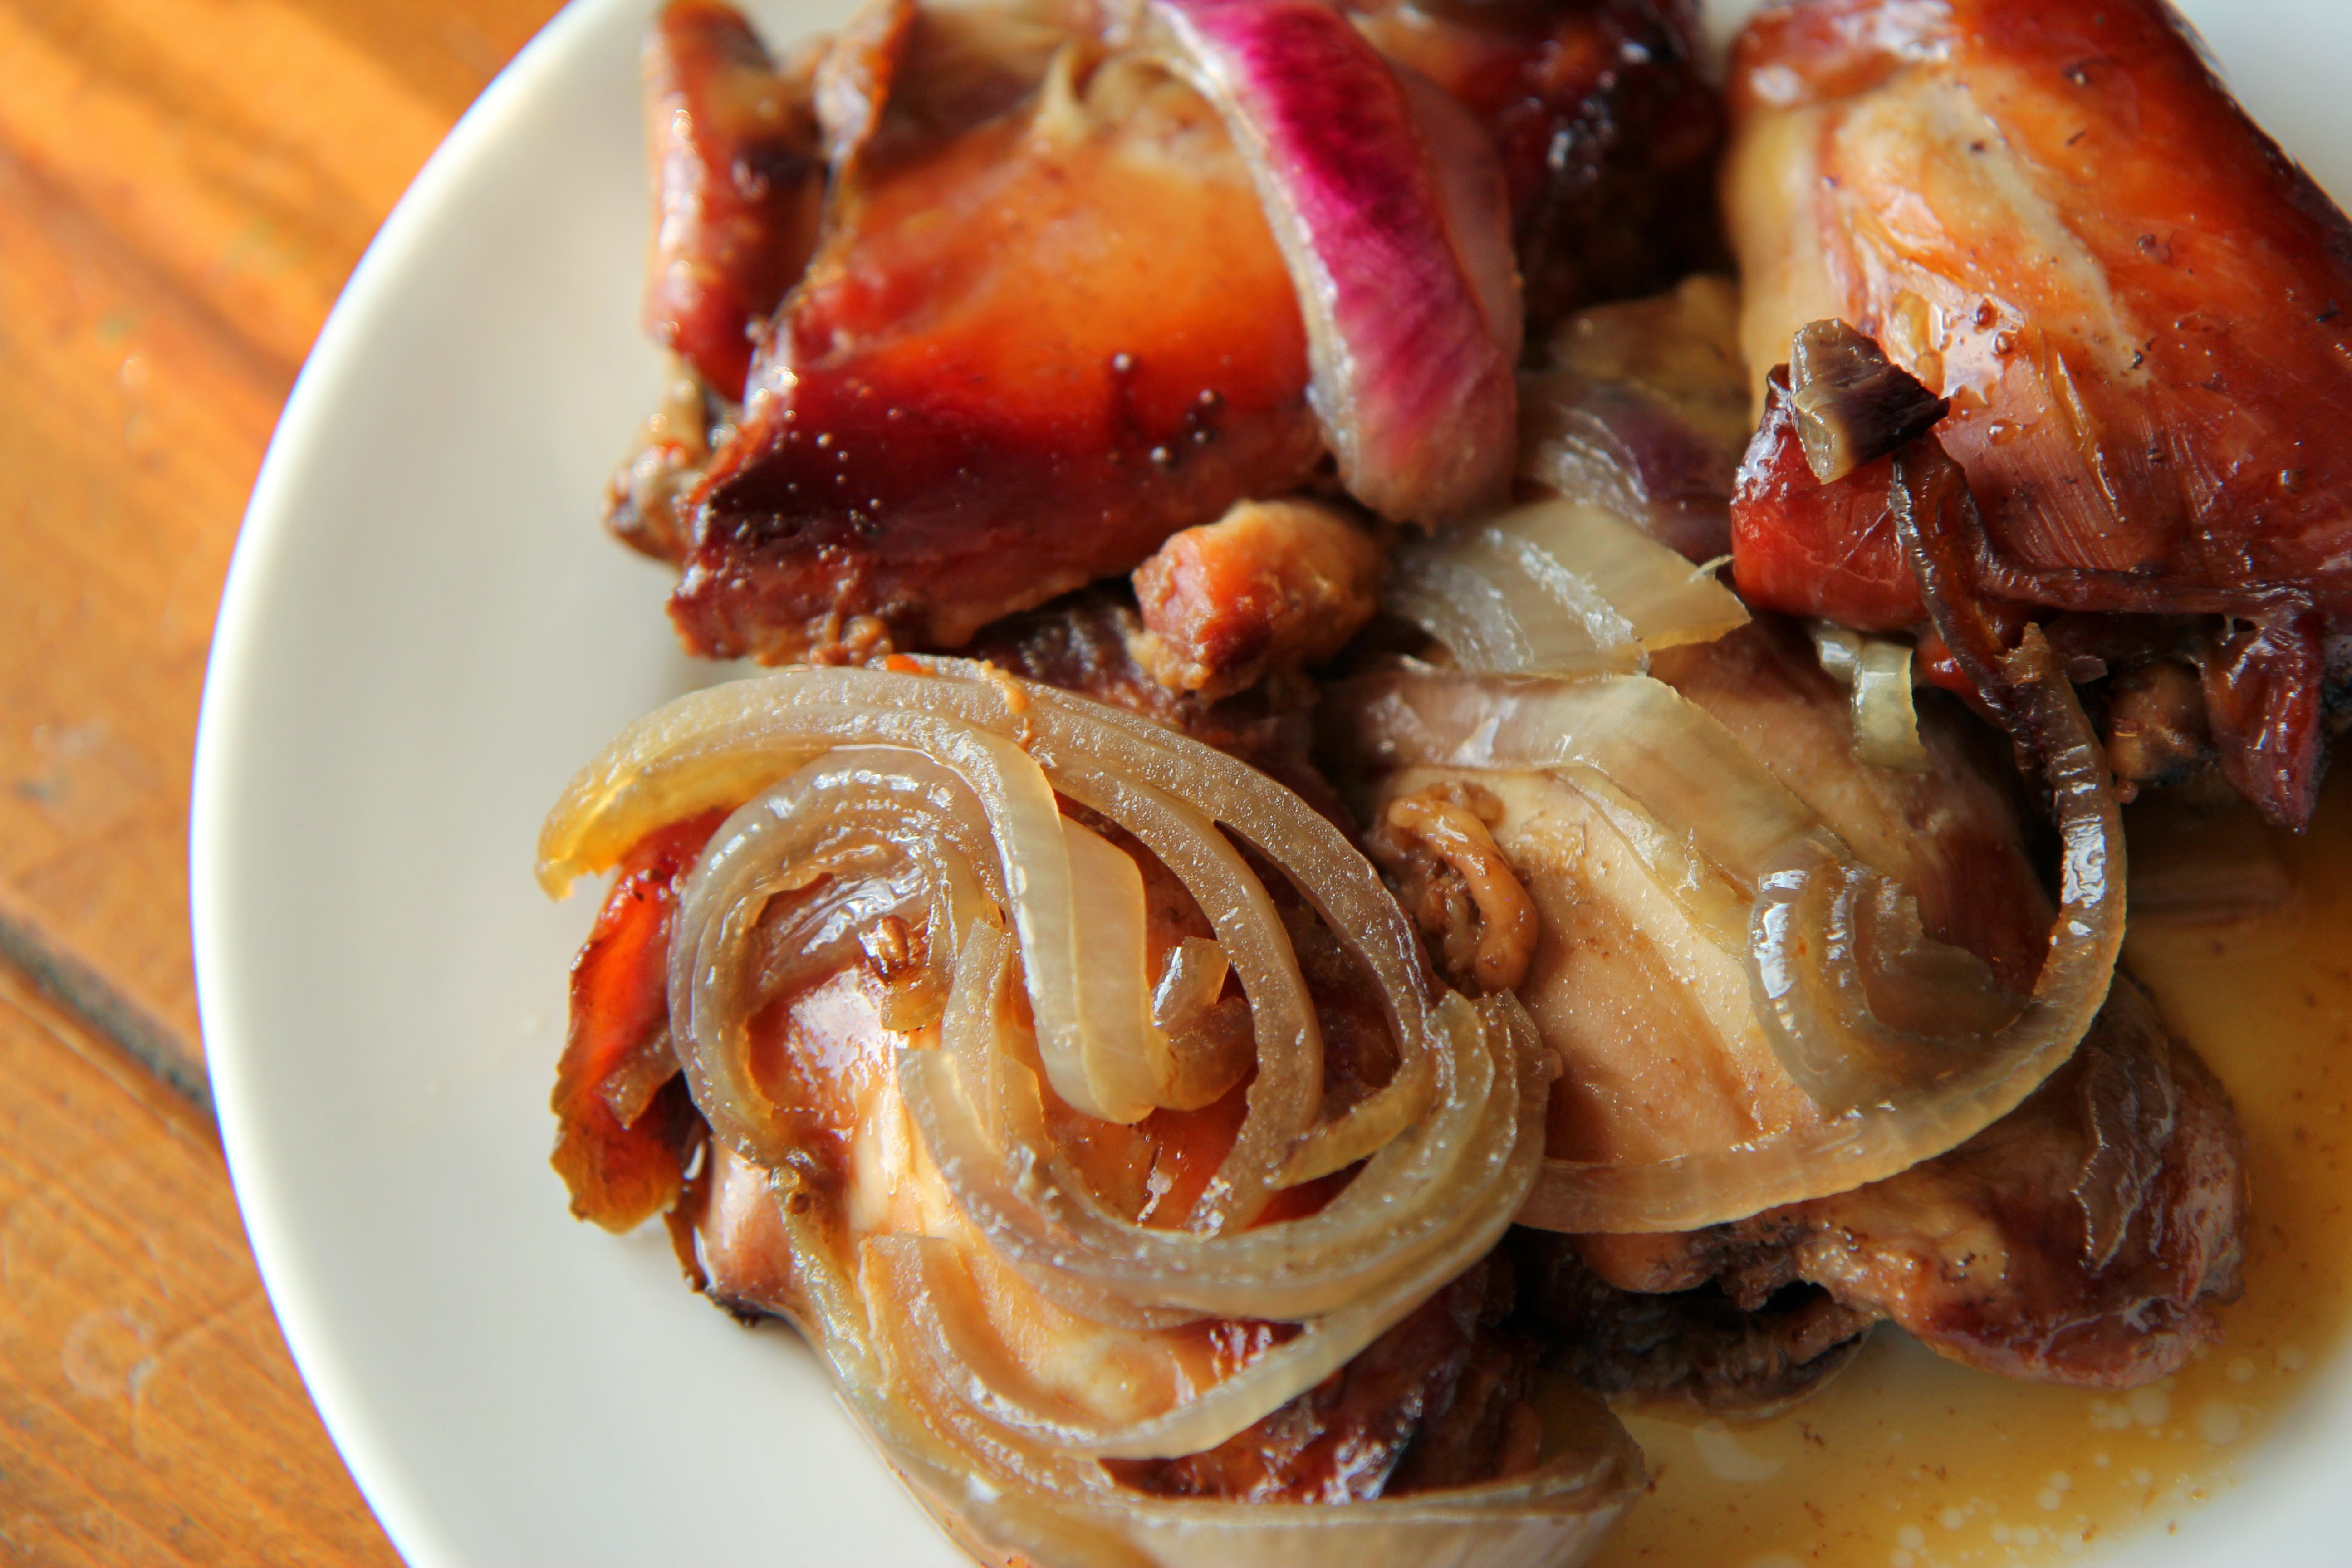 This slow-cooker chicken thigh recipe features beautiful red onion and strawberry jam!